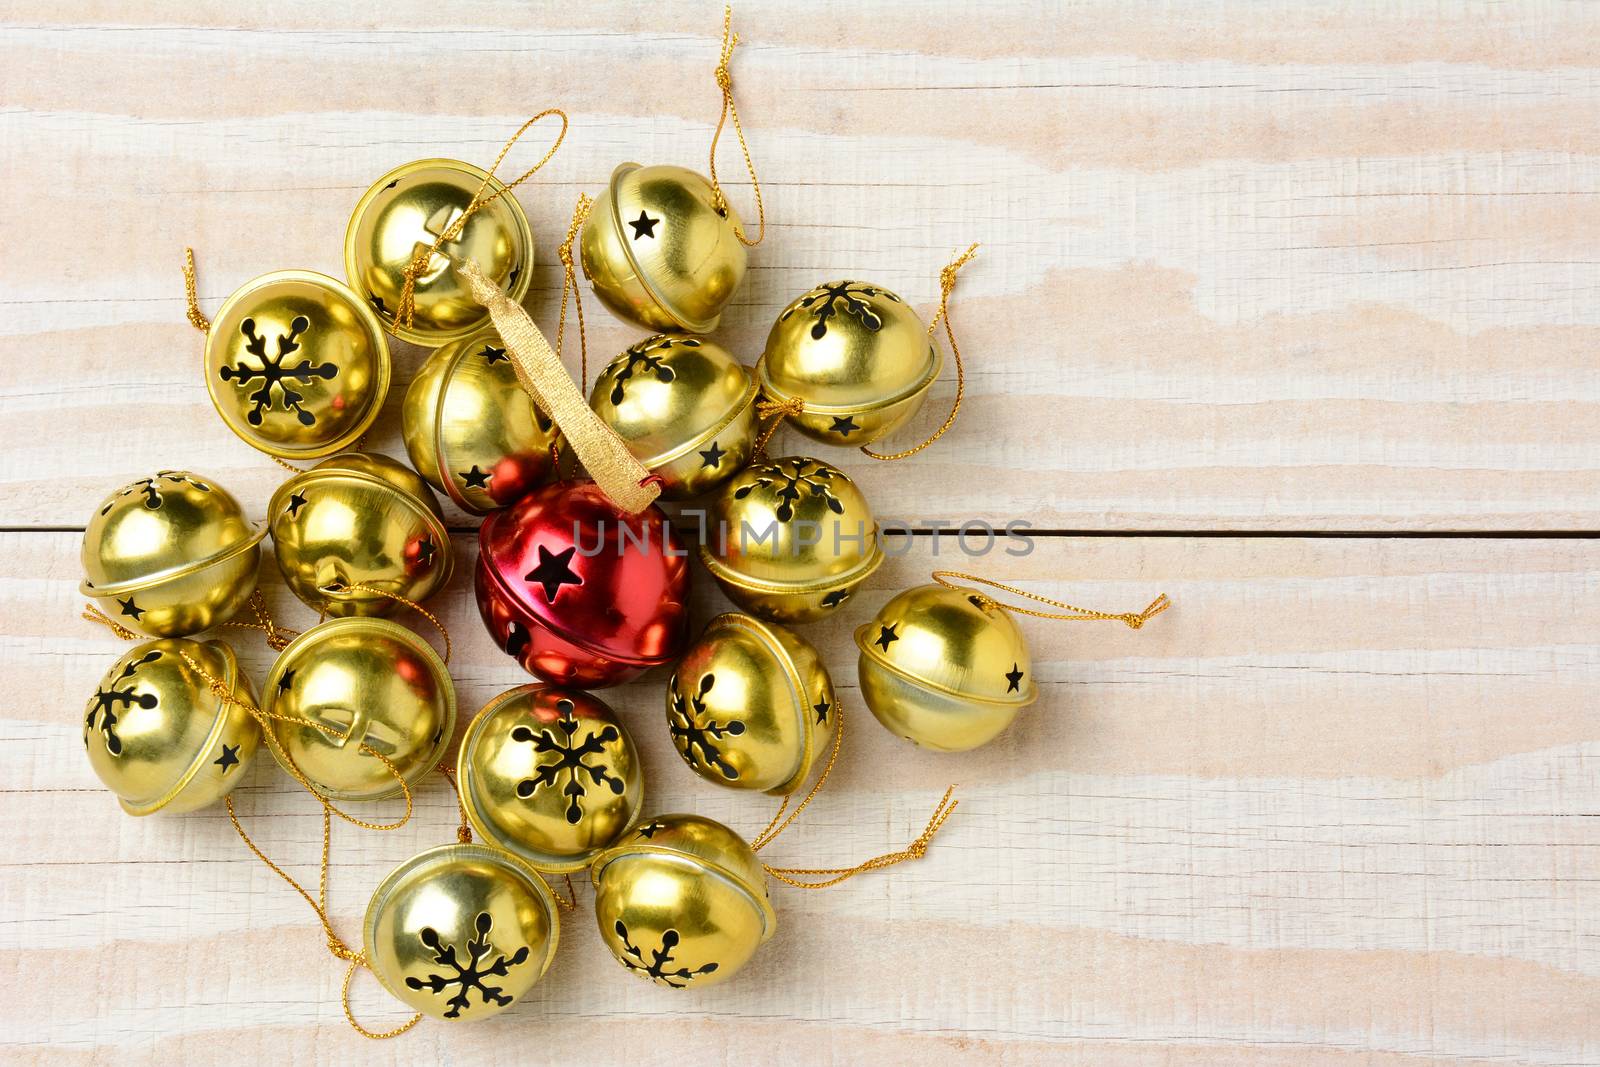 High angle shot of a group of Christmas jingle bells on a white wood table. Horizontal format  with one red bell surrounded by a lot of smaller gold bells.